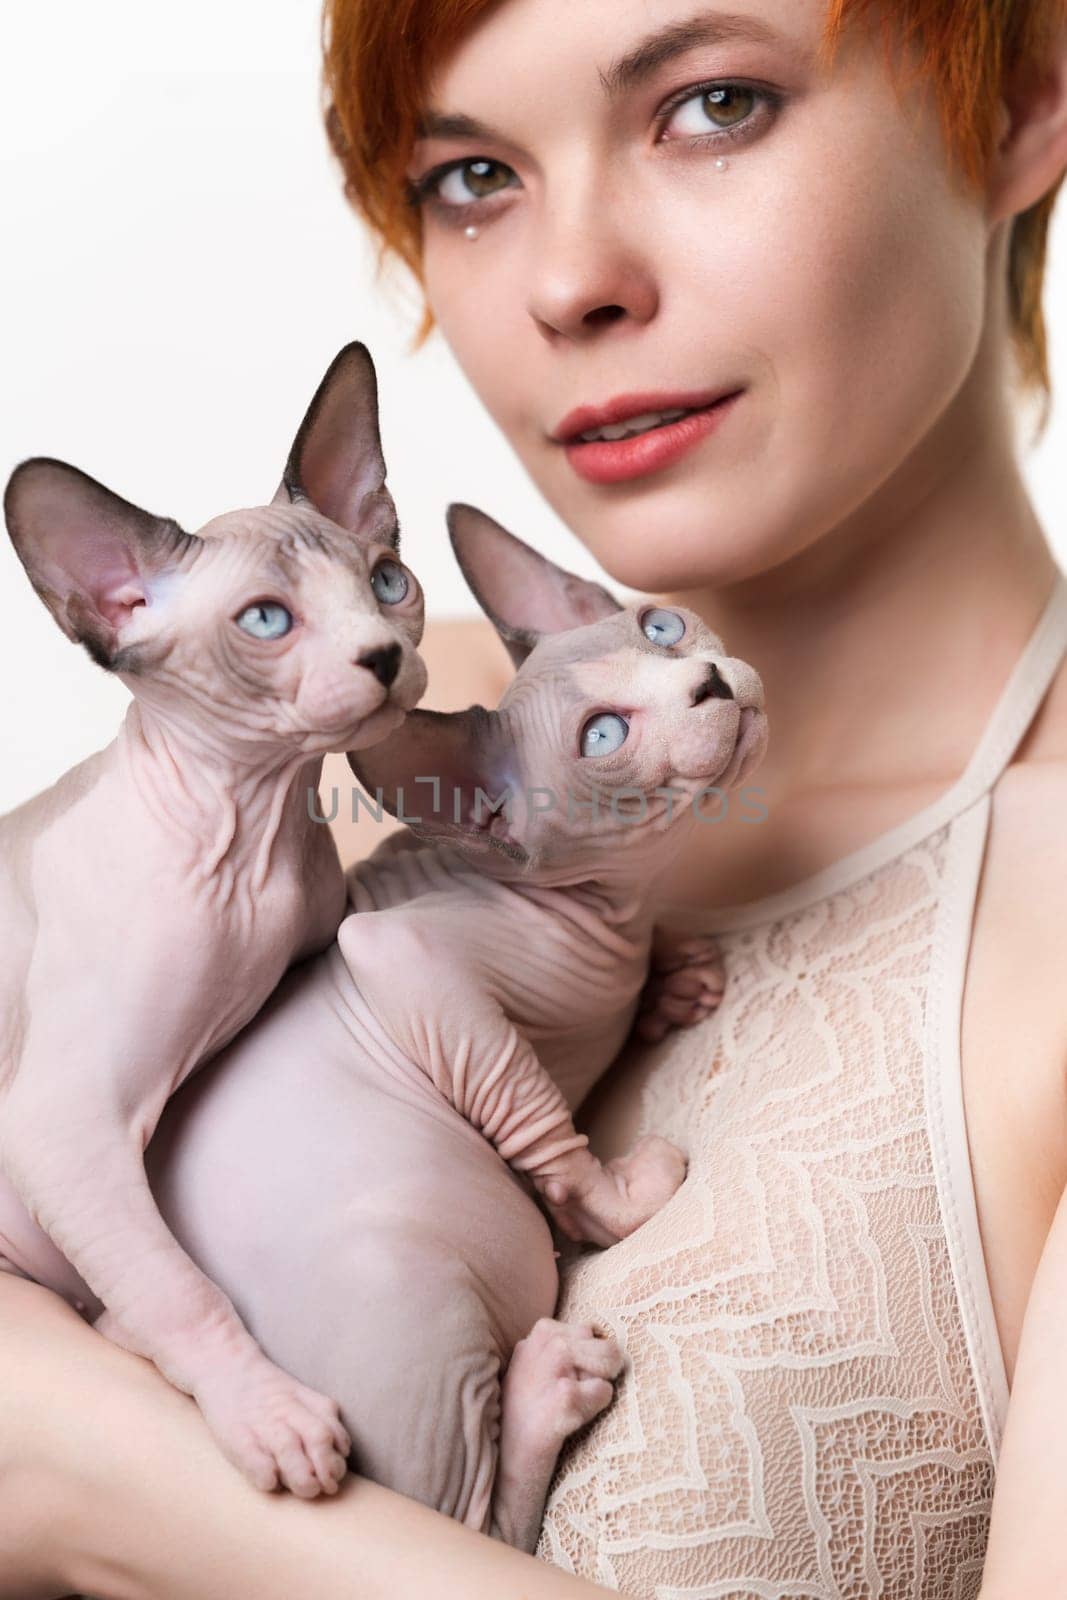 Cute redhead young woman gently hugging two domestic Sphynx Cat to her chest and looking at camera. Selective focus on friendly hairless kittens. Studio shot on white background. Part of series.